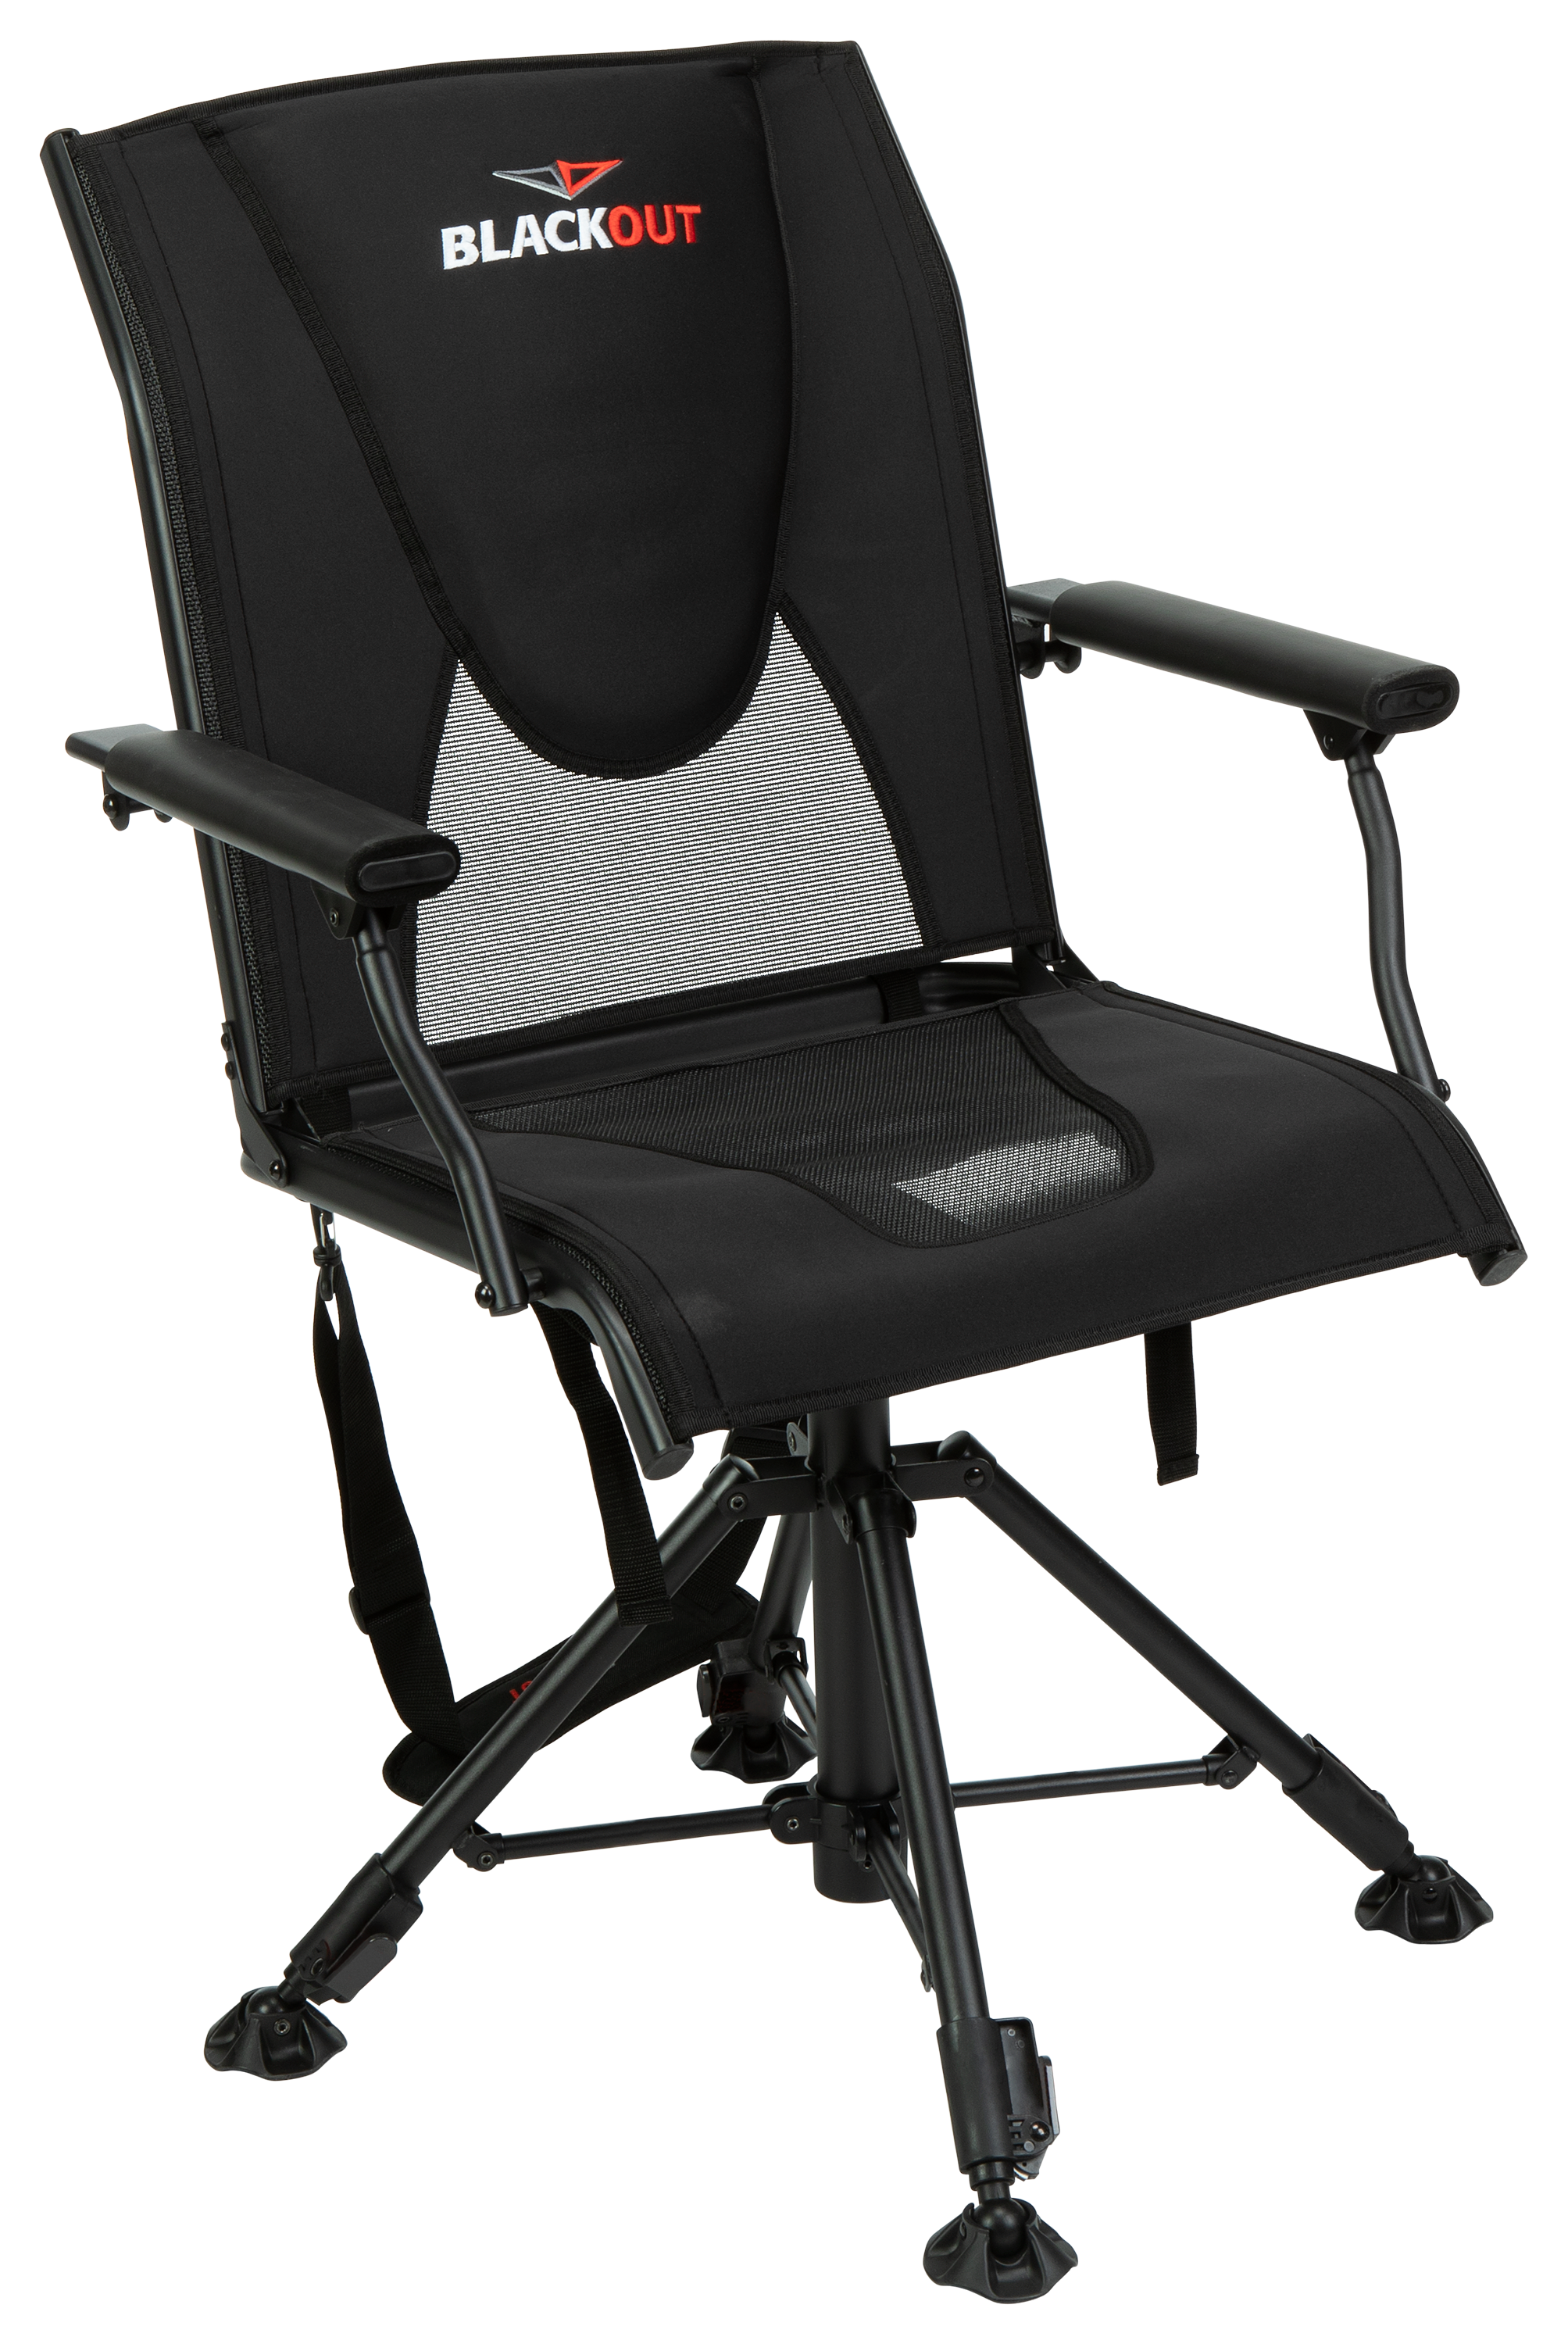 Guide Gear Big Boy Comfort Swivel Hunting Blind Chair with